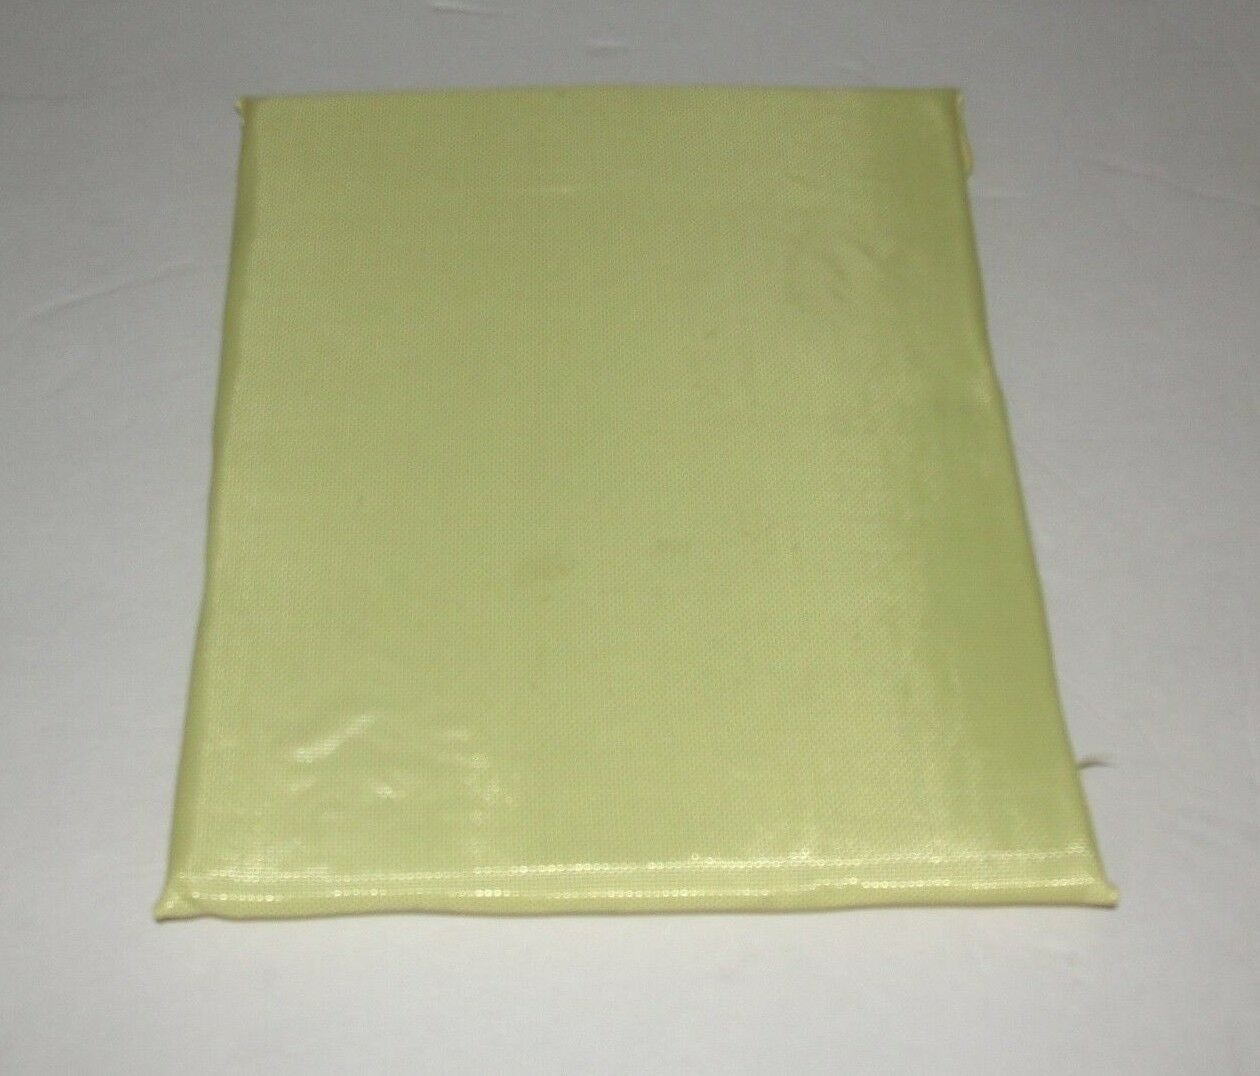 6x6 Level Iiia Body Armor Plate Bullet Proof Insert Made With Dupont Kevlar